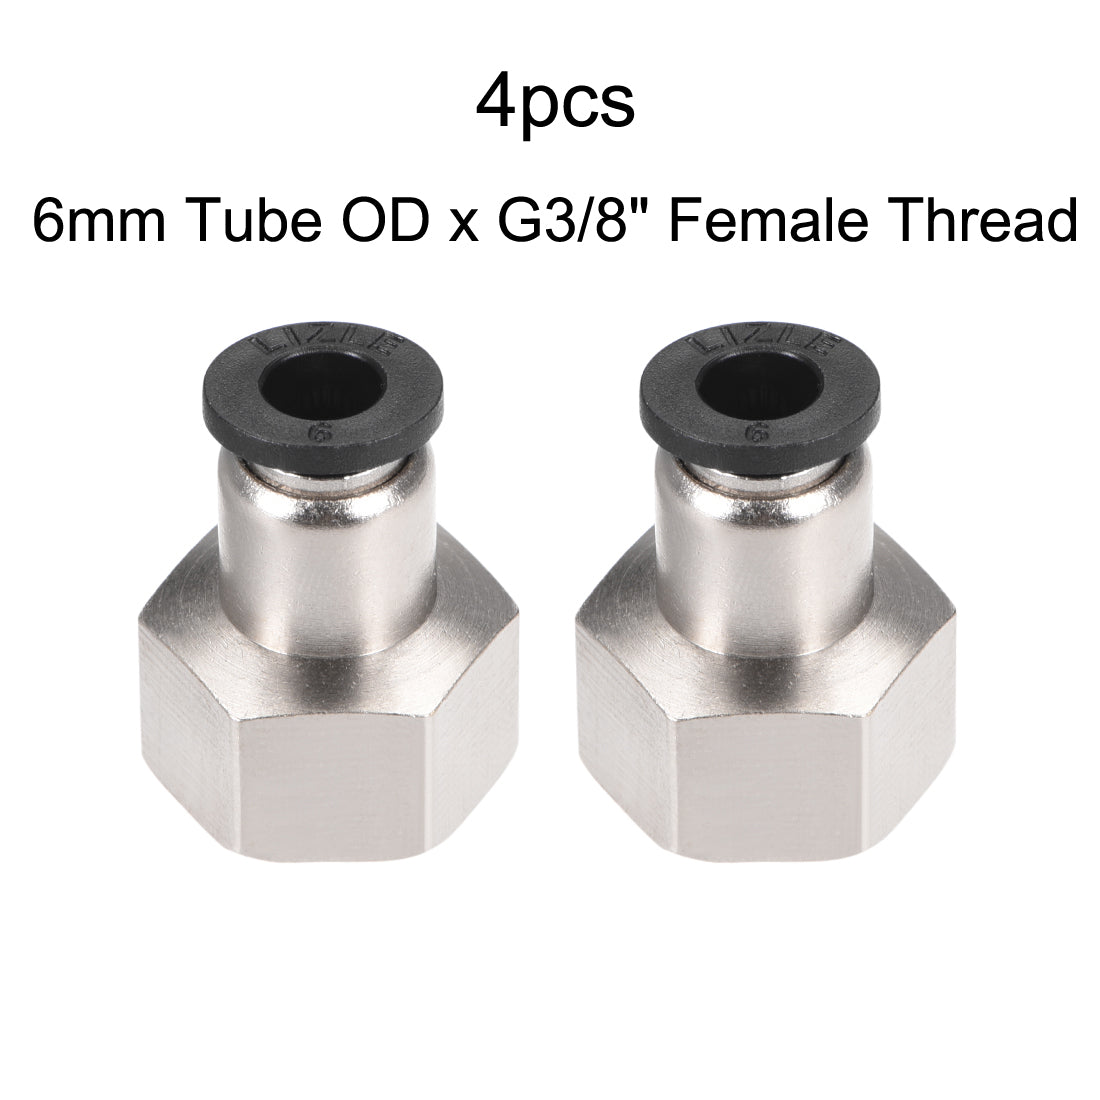 uxcell Uxcell Push to Connect Tube Fitting Adapter 6mm OD x BSPT 3/8" Female Silver Tone 4pcs